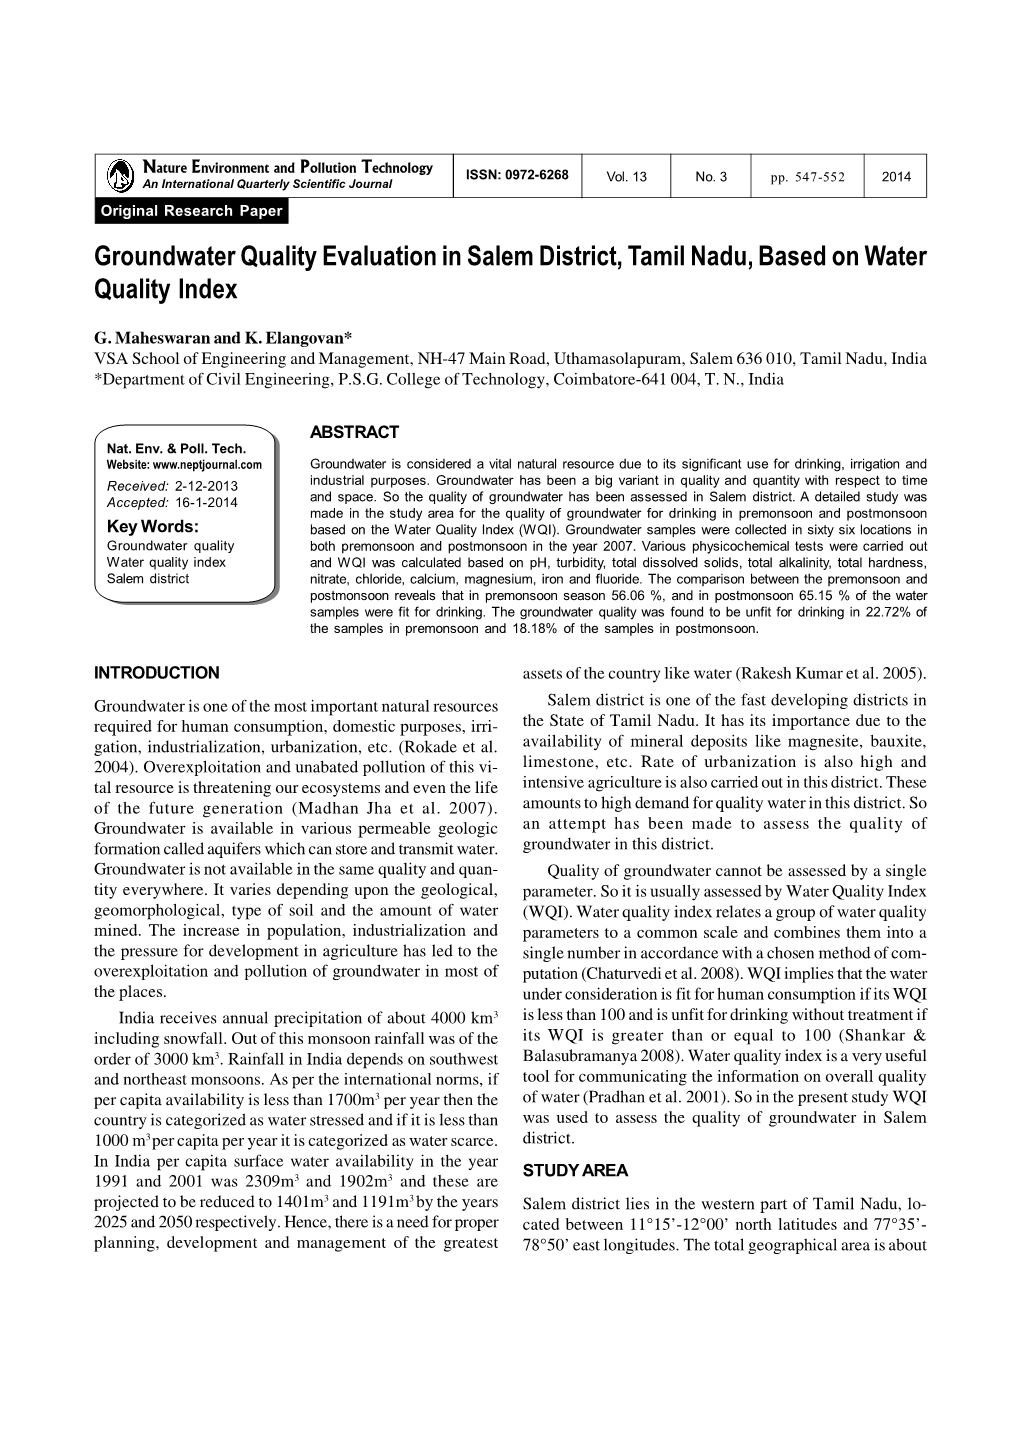 Groundwater Quality Evaluation in Salem District, Tamil Nadu, Based on Water Quality Index